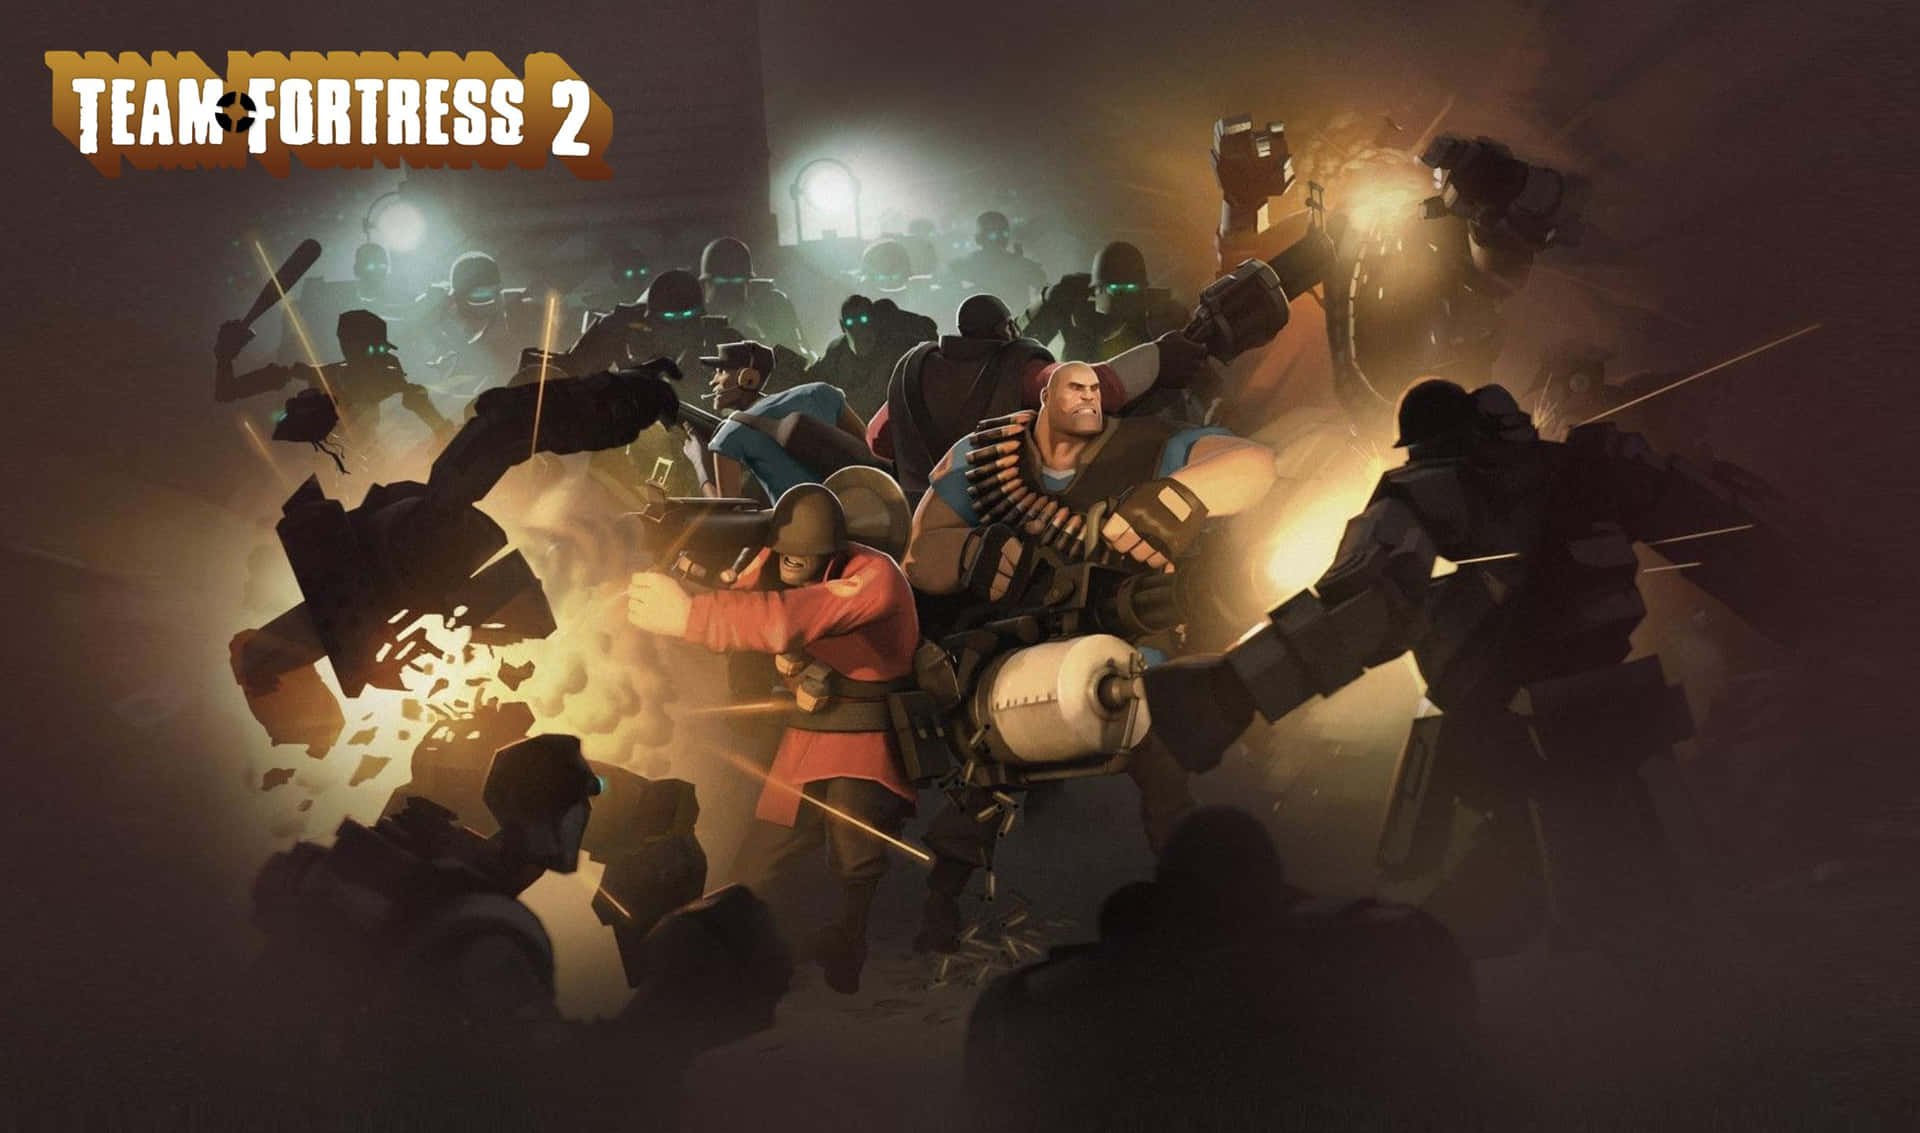 “Team Fortress 2 - Ready for Battle”